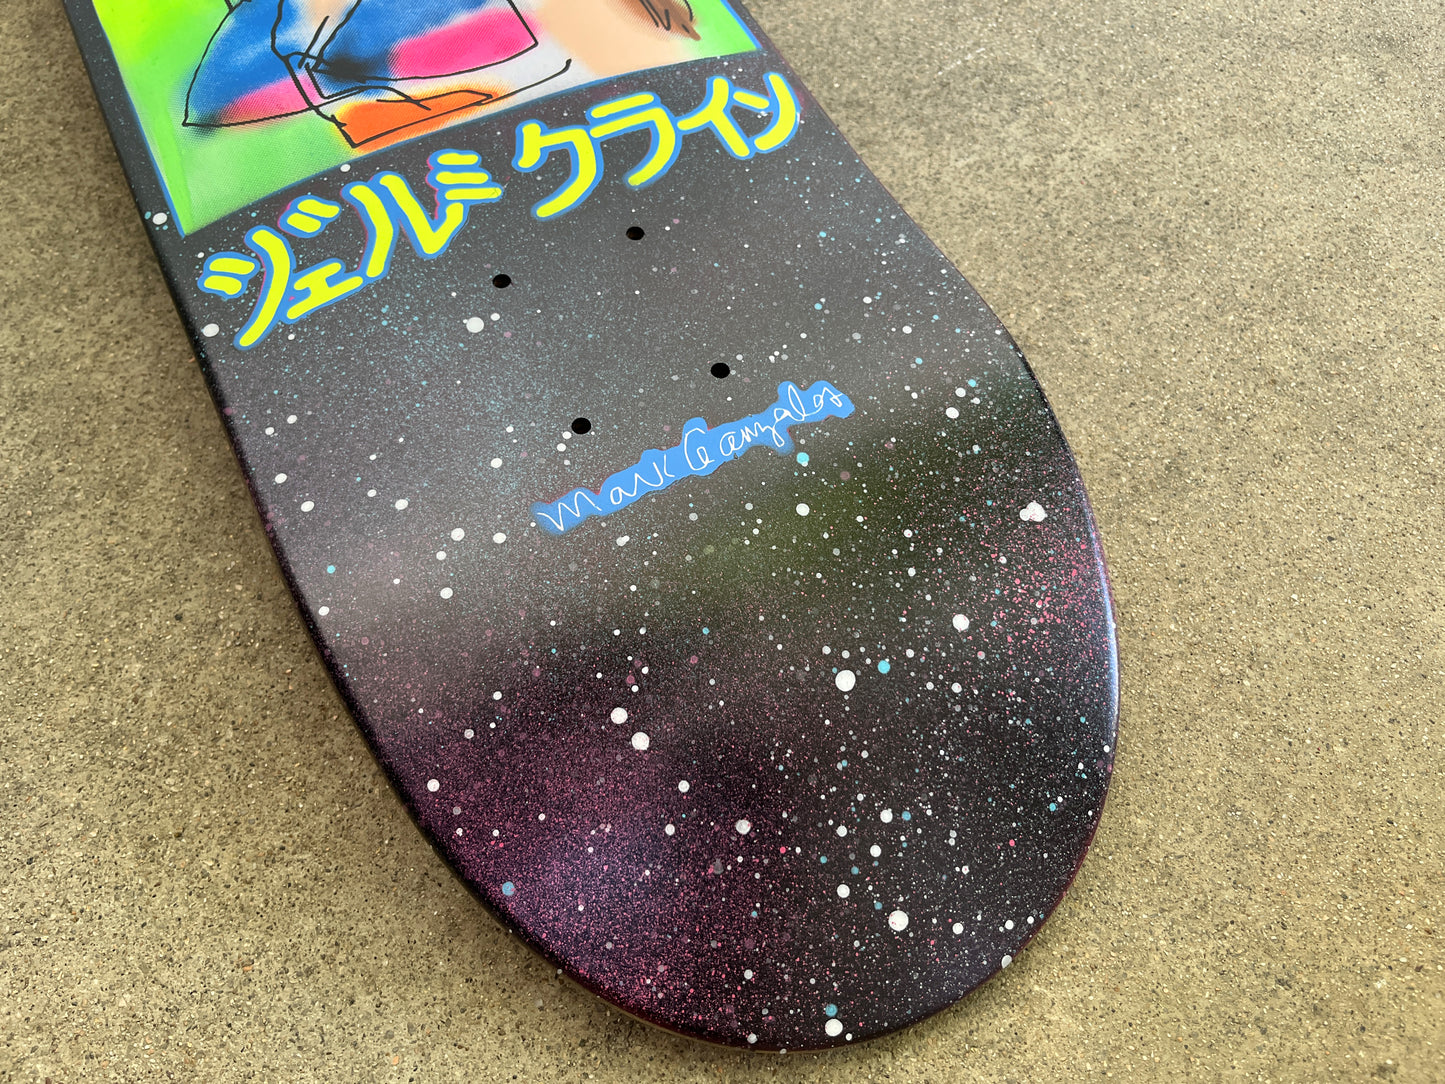 gonz dream girl GALAXY SIGNED 8.25 HAND PAINTED BACKGROUND